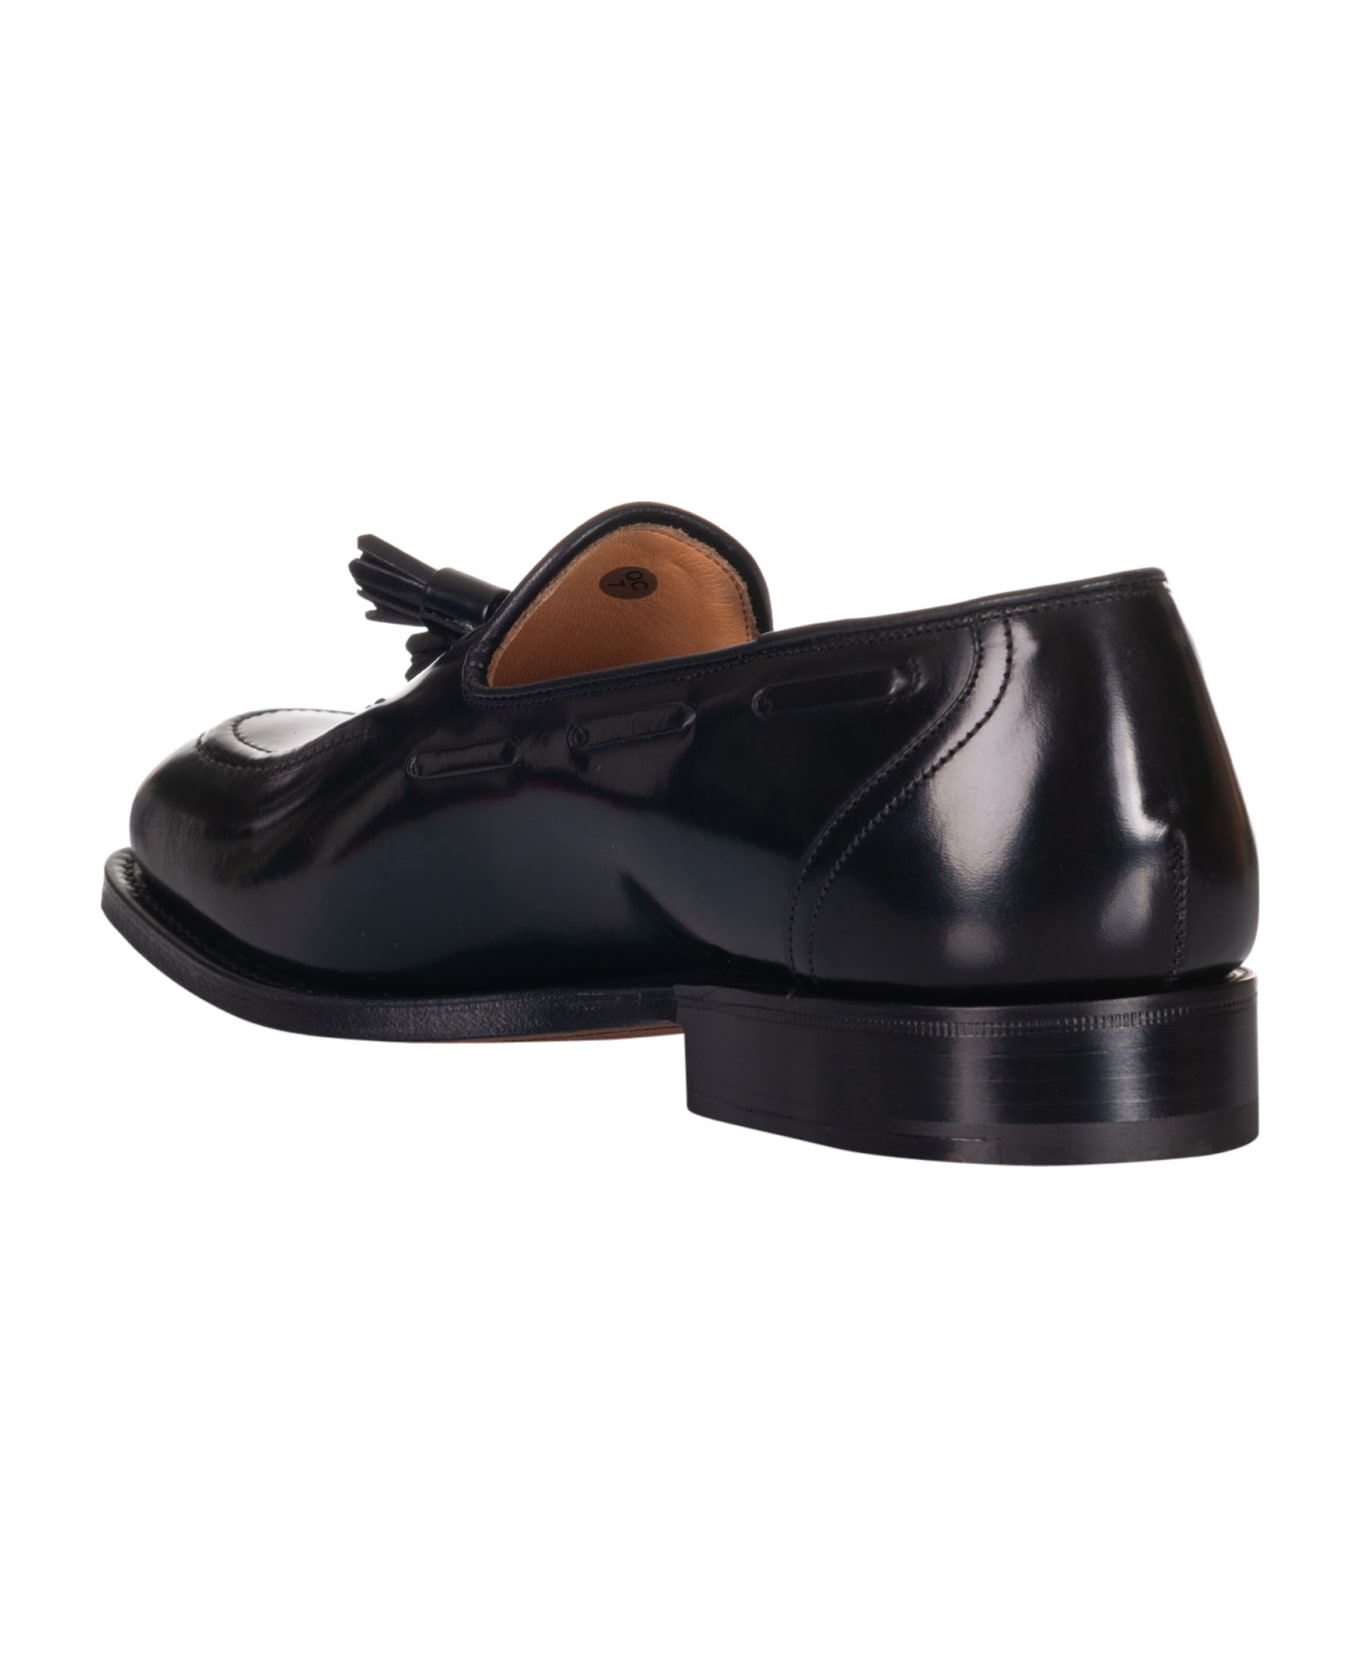 Church's Kingsley Loafers - Black